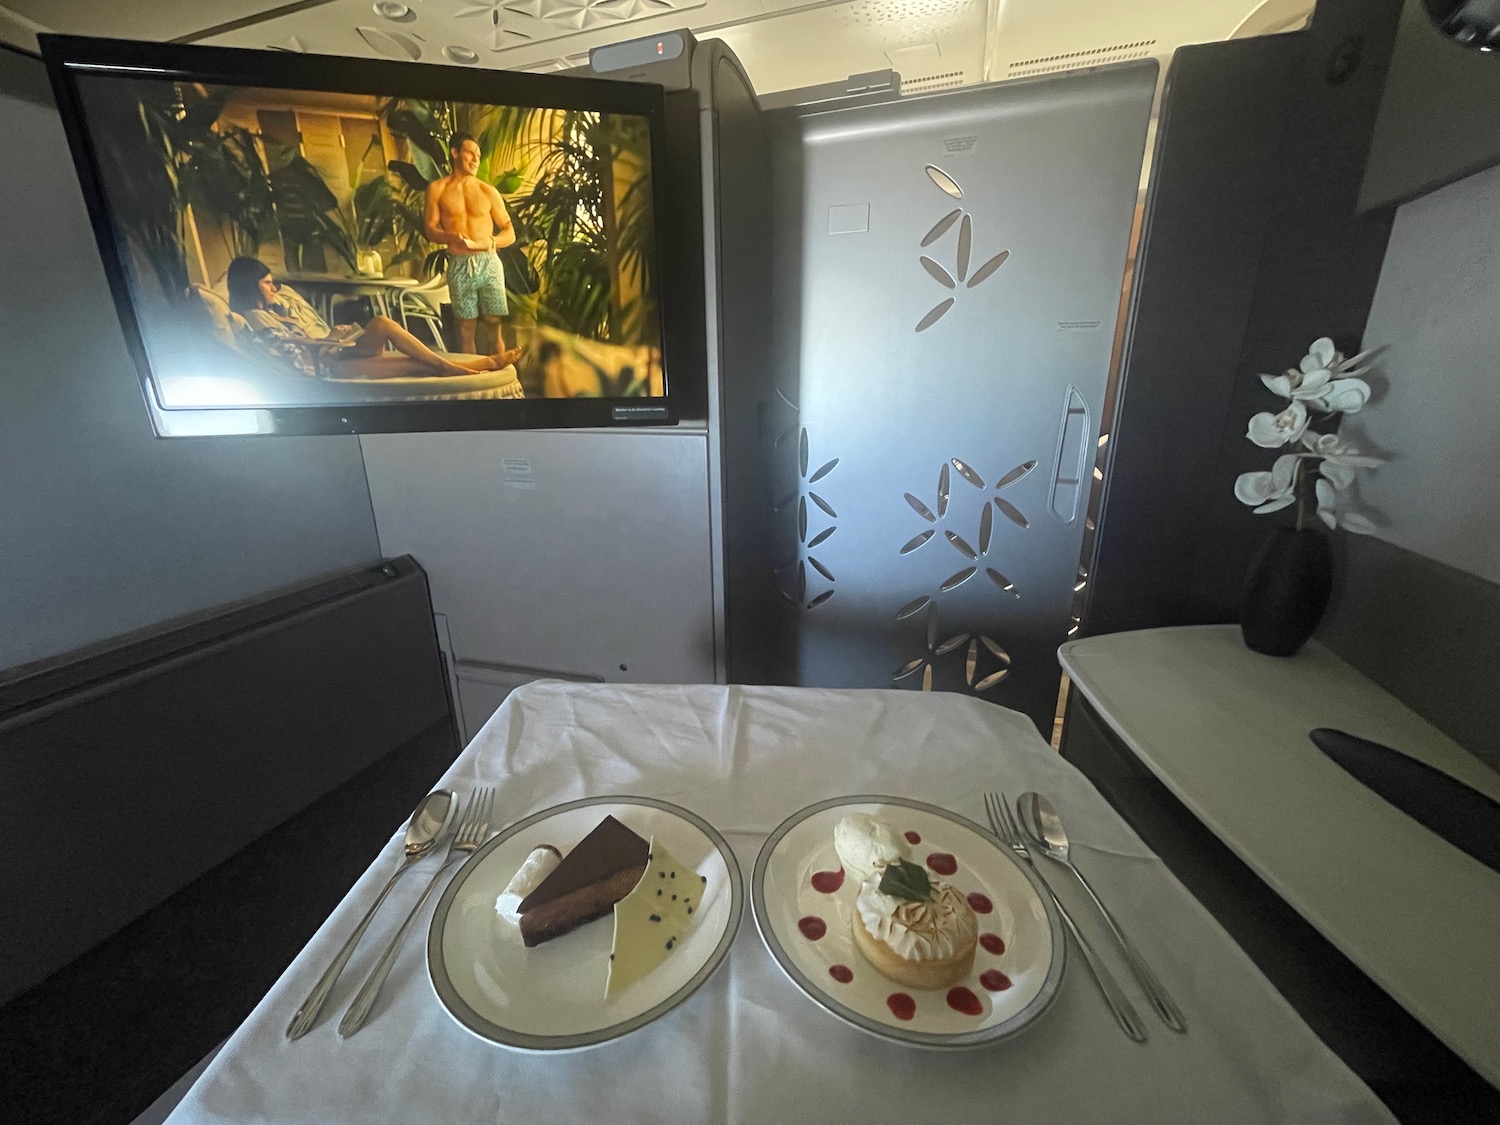 a table with plates of food on it and a television on the wall